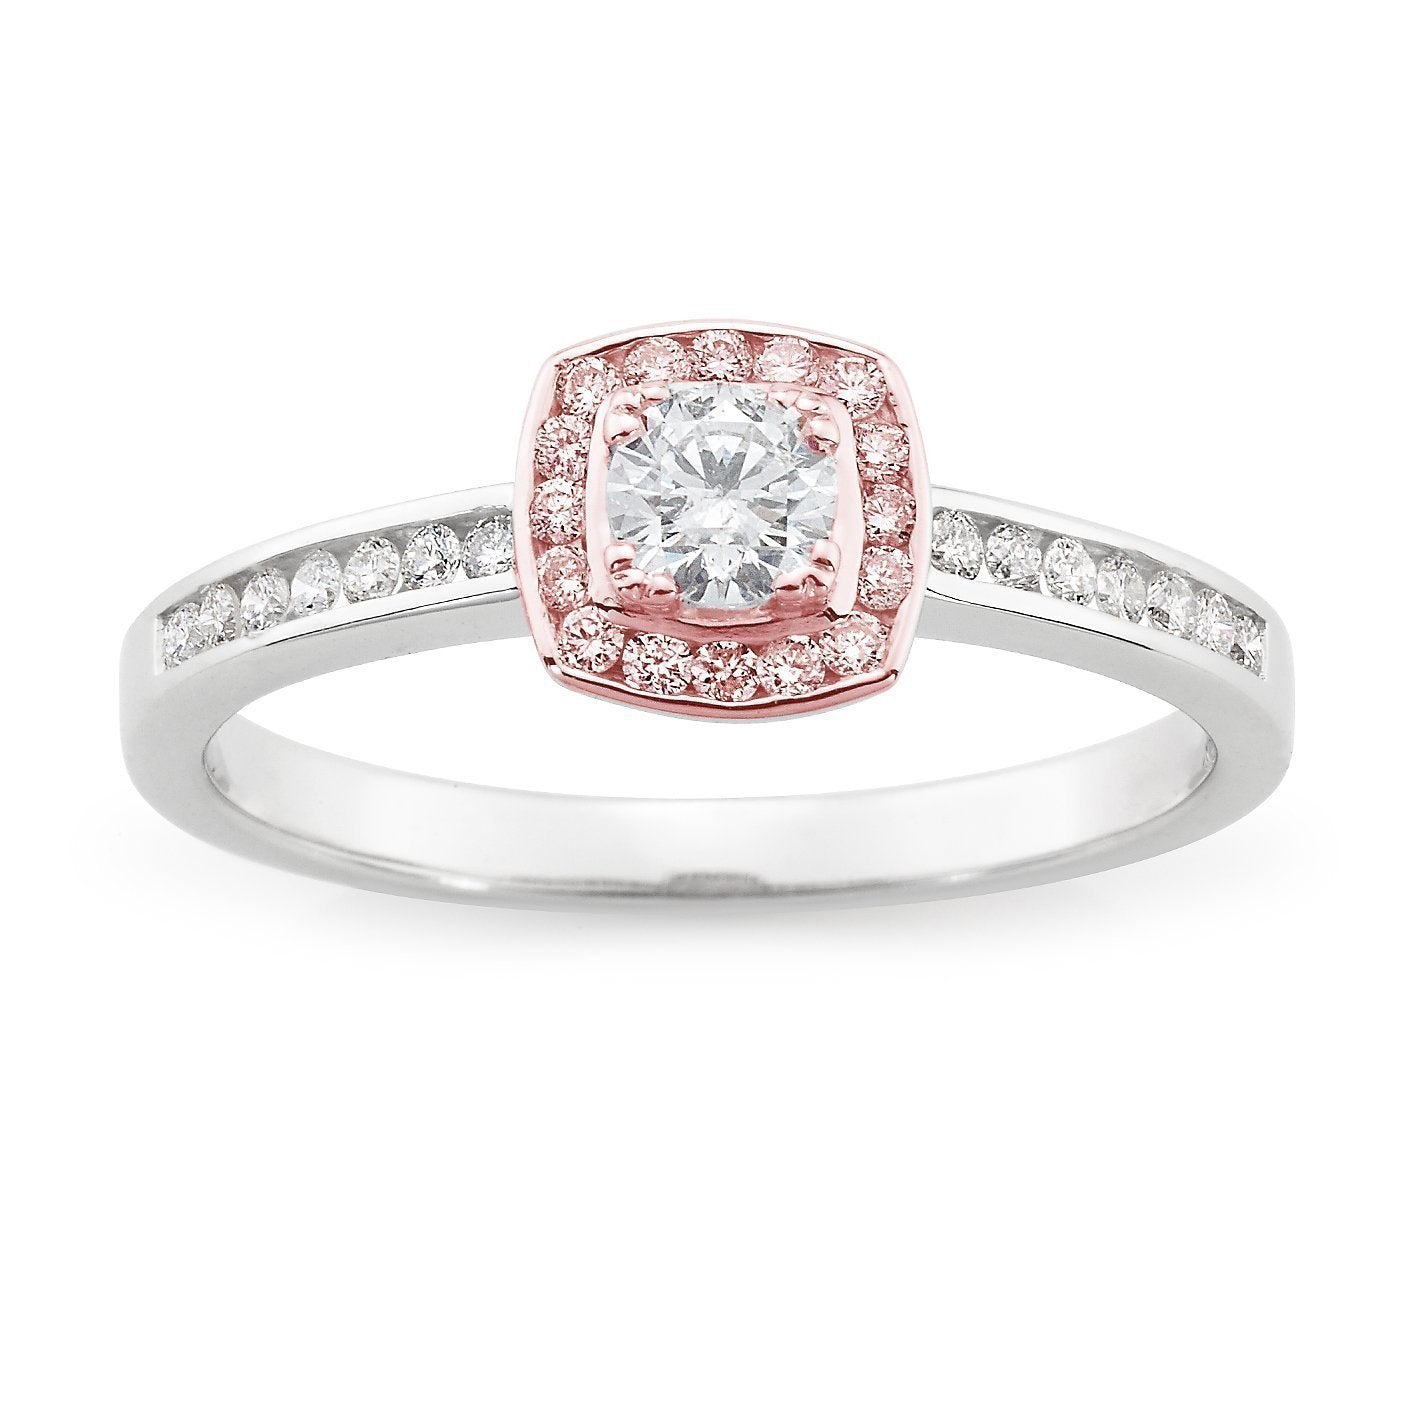 PINK CAVIAR 0.42ct Pink Diamond Halo Engagement Ring in 9ct White & Rose Gold